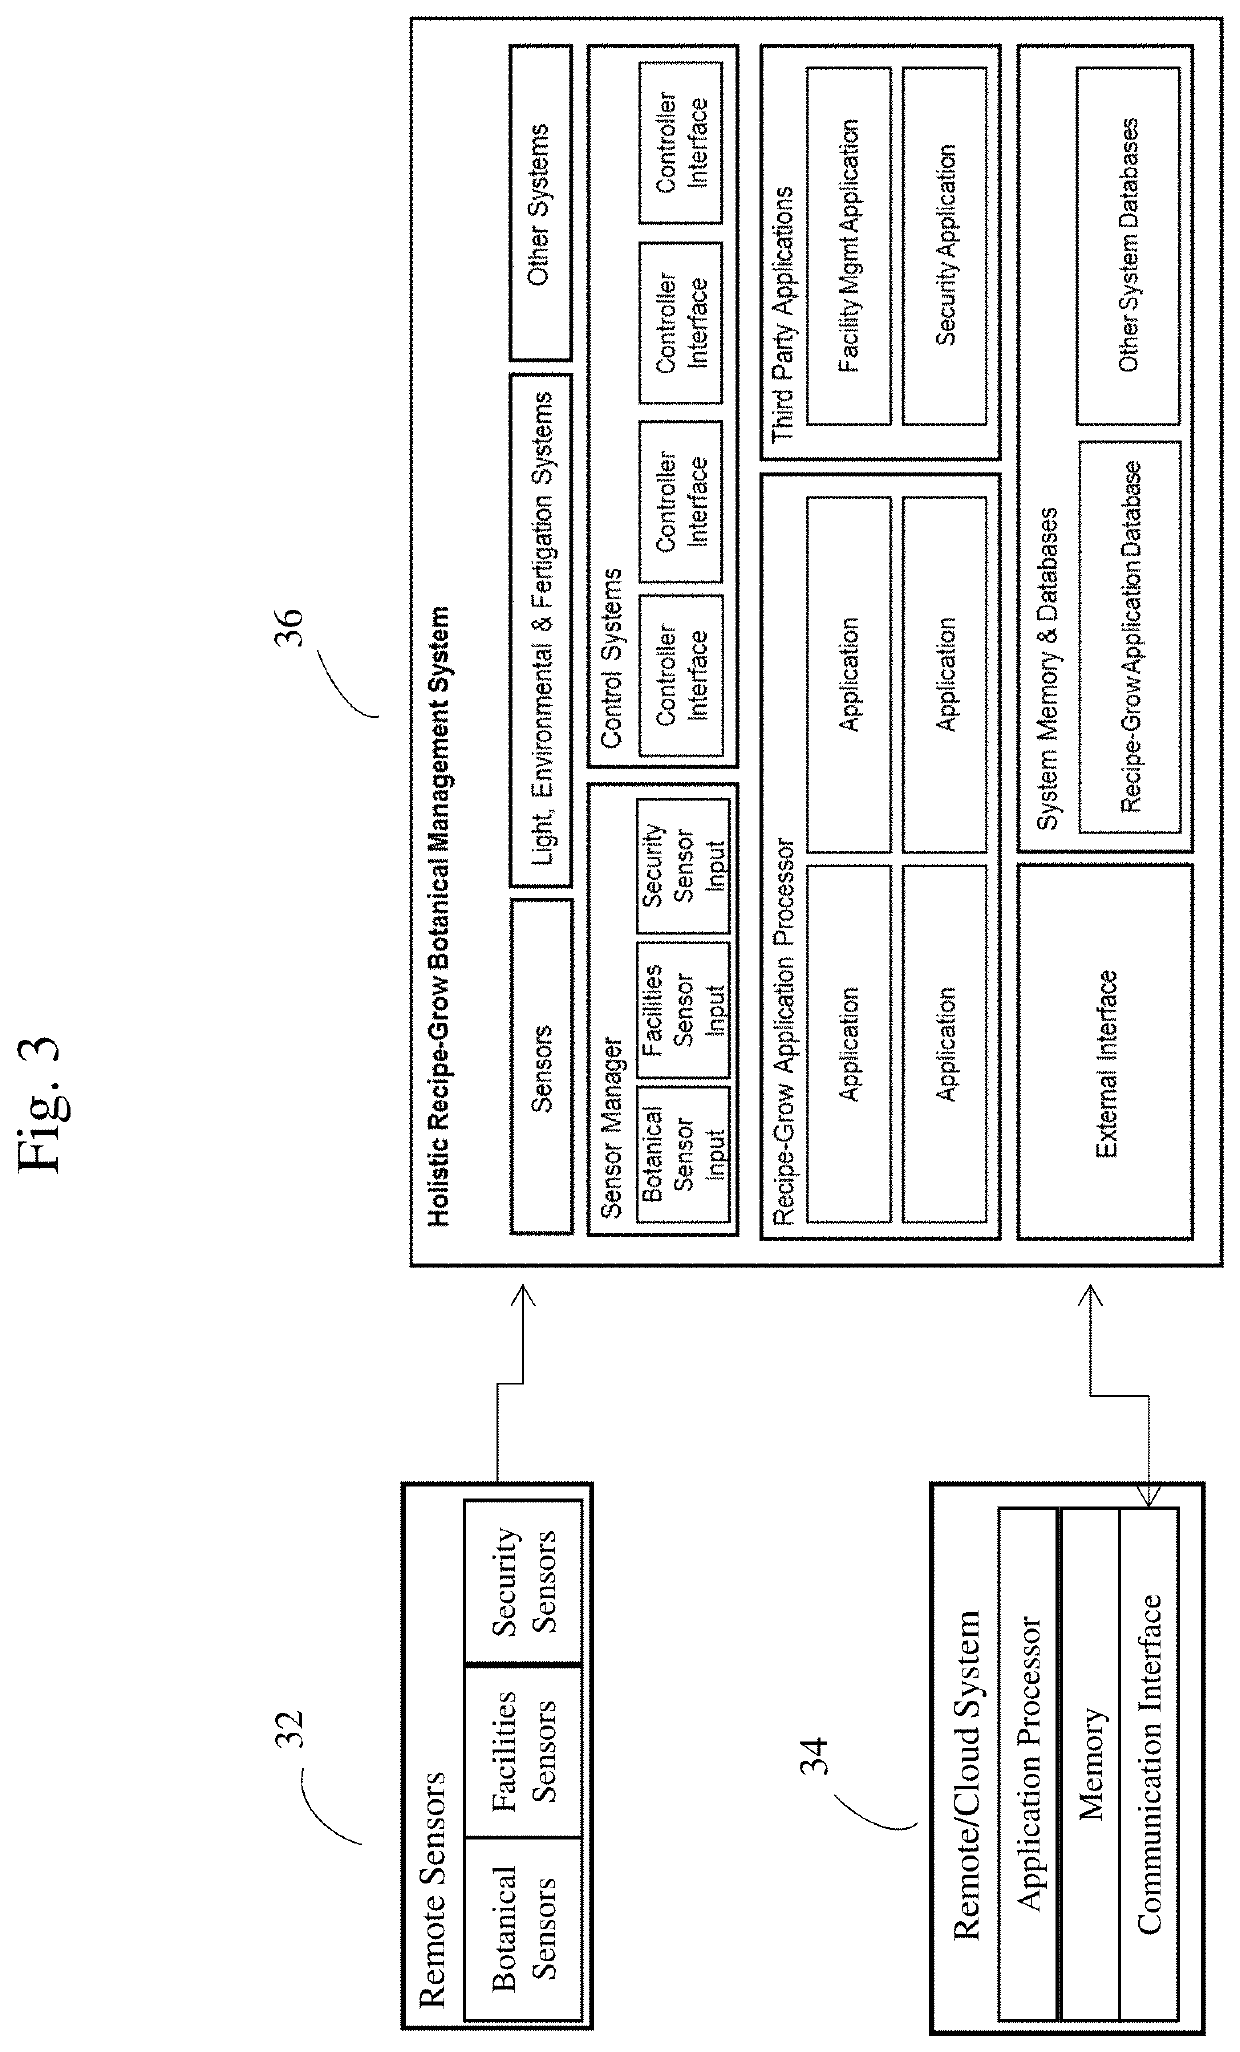 Spectral deficiency driven control systems and methods in plant growth automation